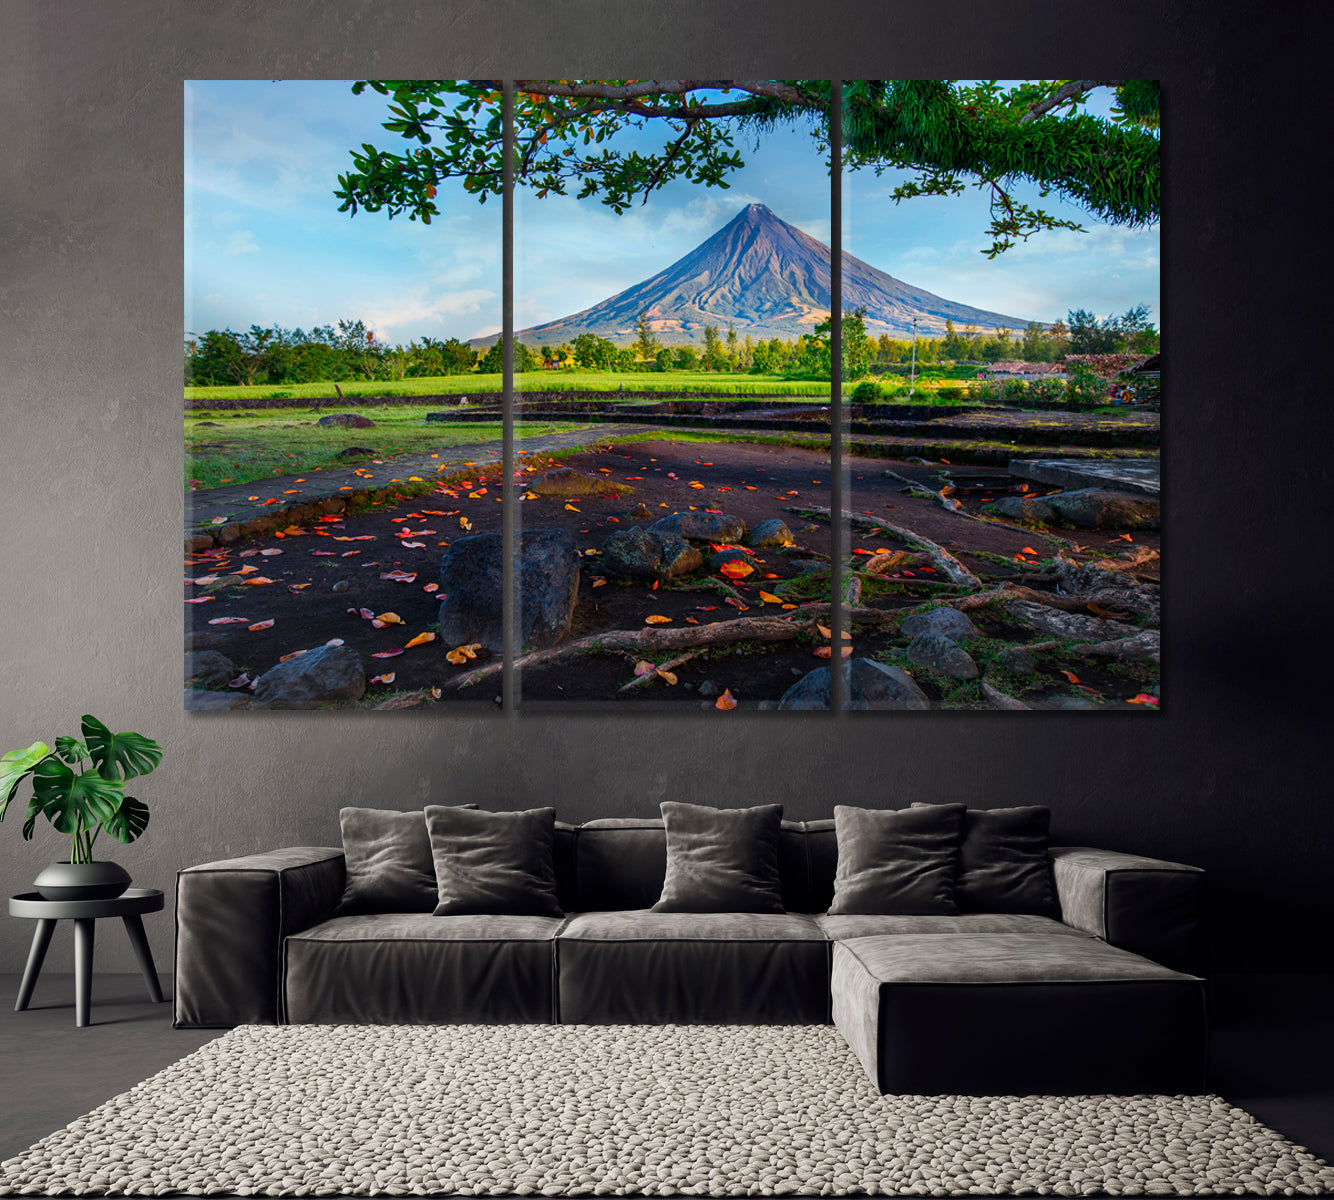 Mayon Volcano Philippines Canvas Print ArtLexy 3 Panels 36"x24" inches 